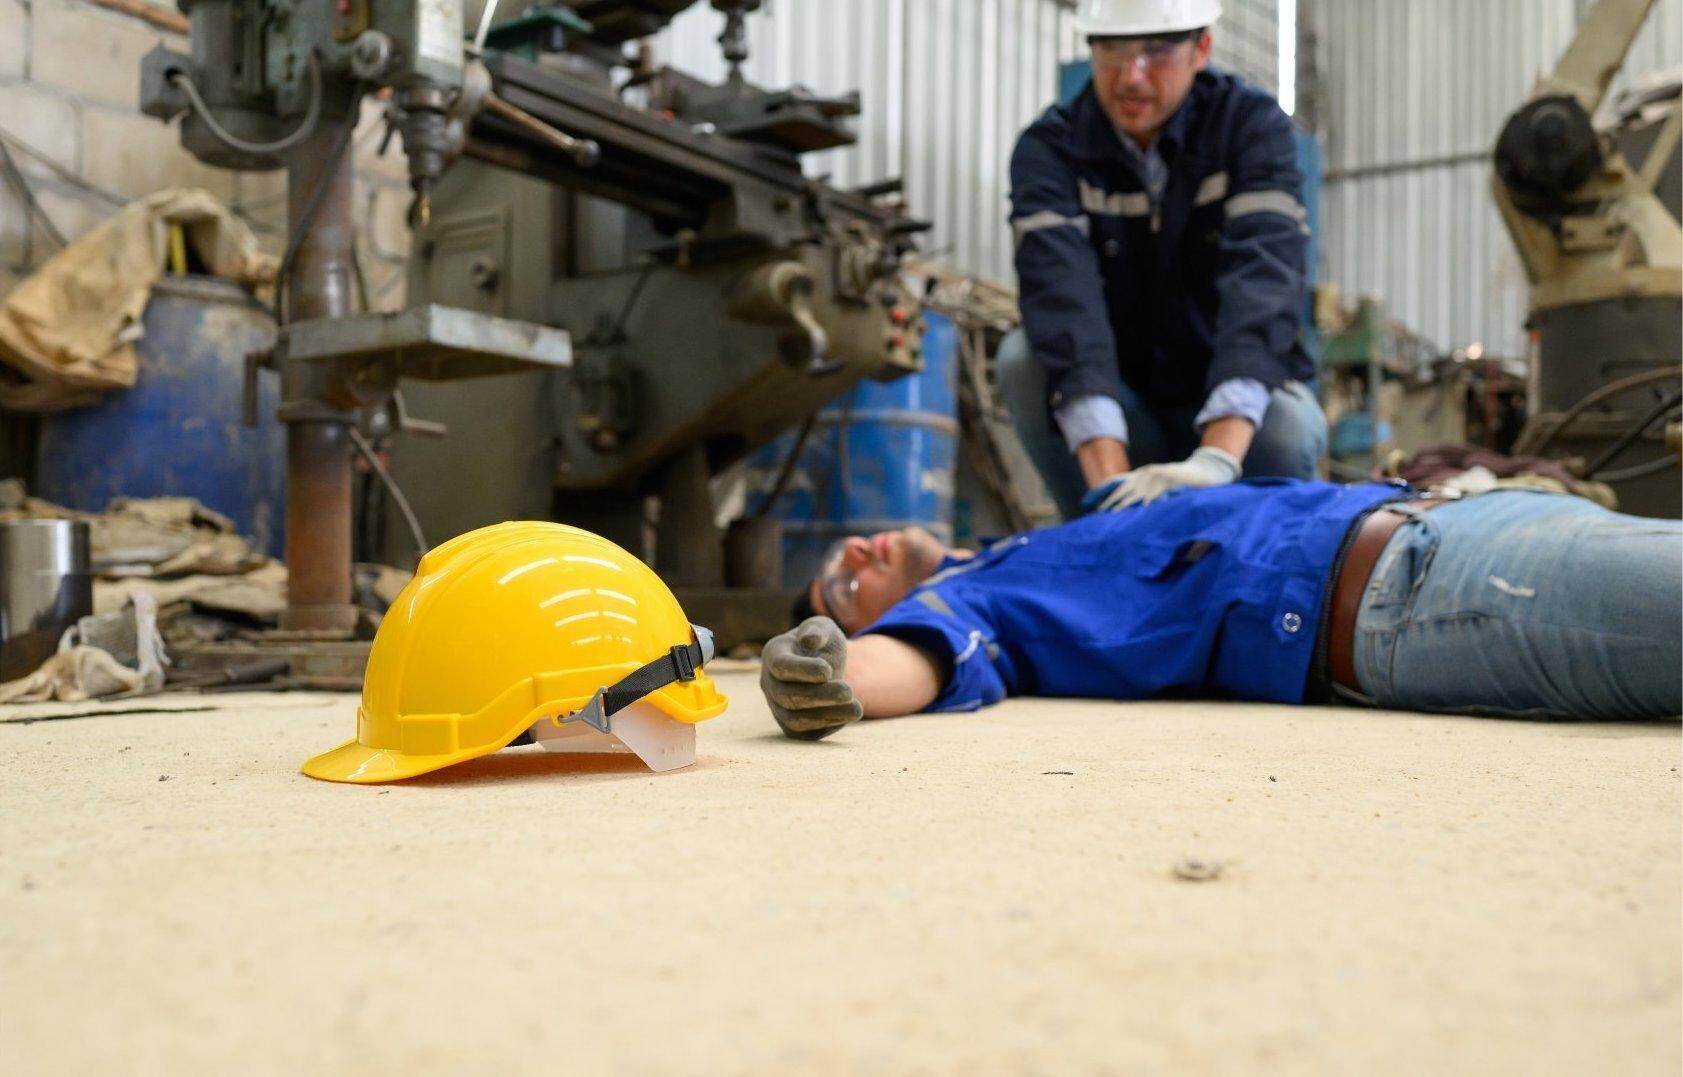 An unconscious man who has been injured on the job who will file for workers compensation in Duluth, Georgia